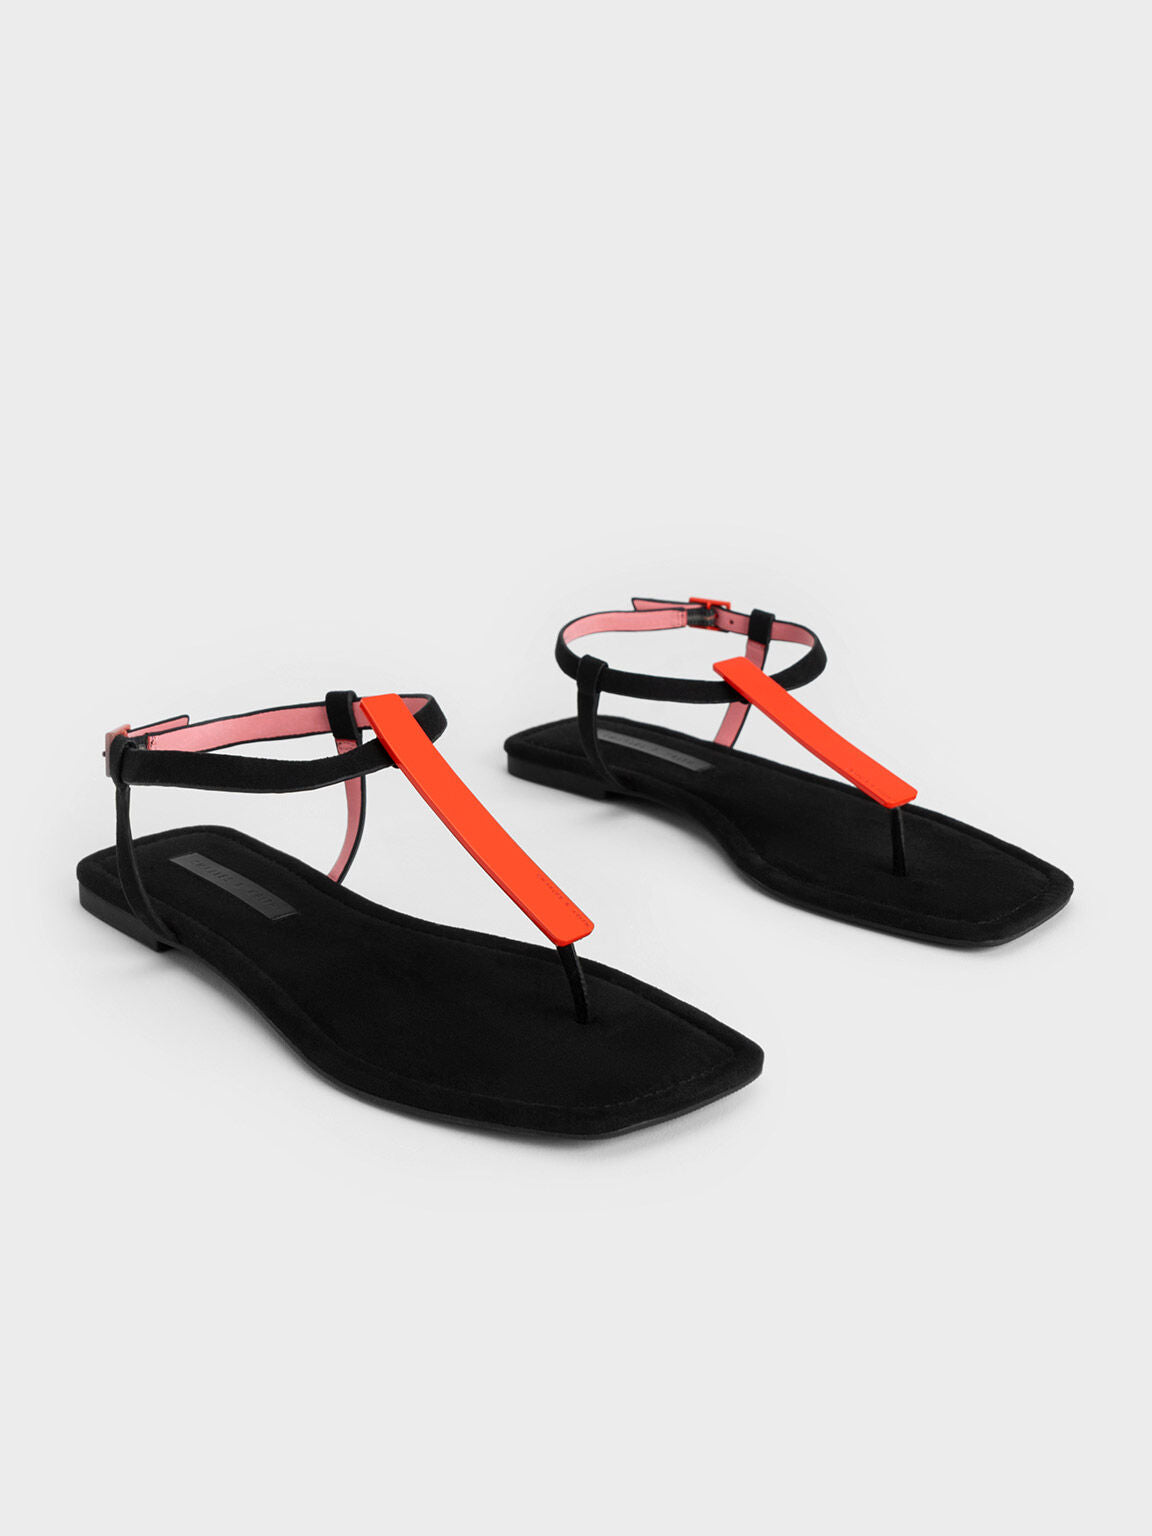 Strap In Style & Discover the Best Sandals for Women – Paragon